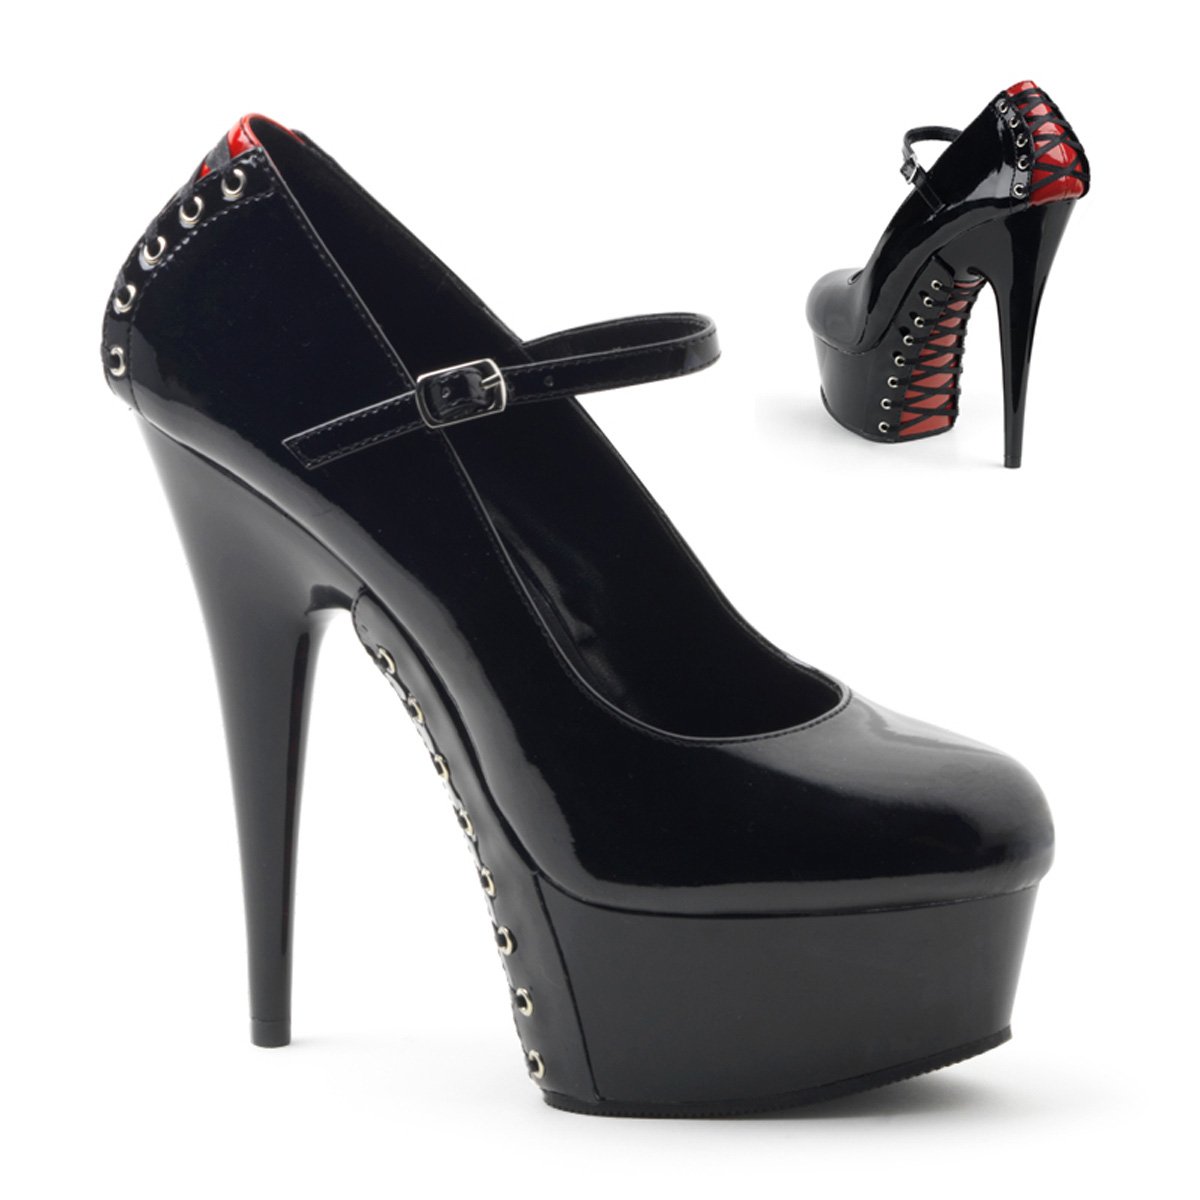 Pleaser Delight-687Fh Platforms | Buy Sexy Shoes at Shoefreaks.ca